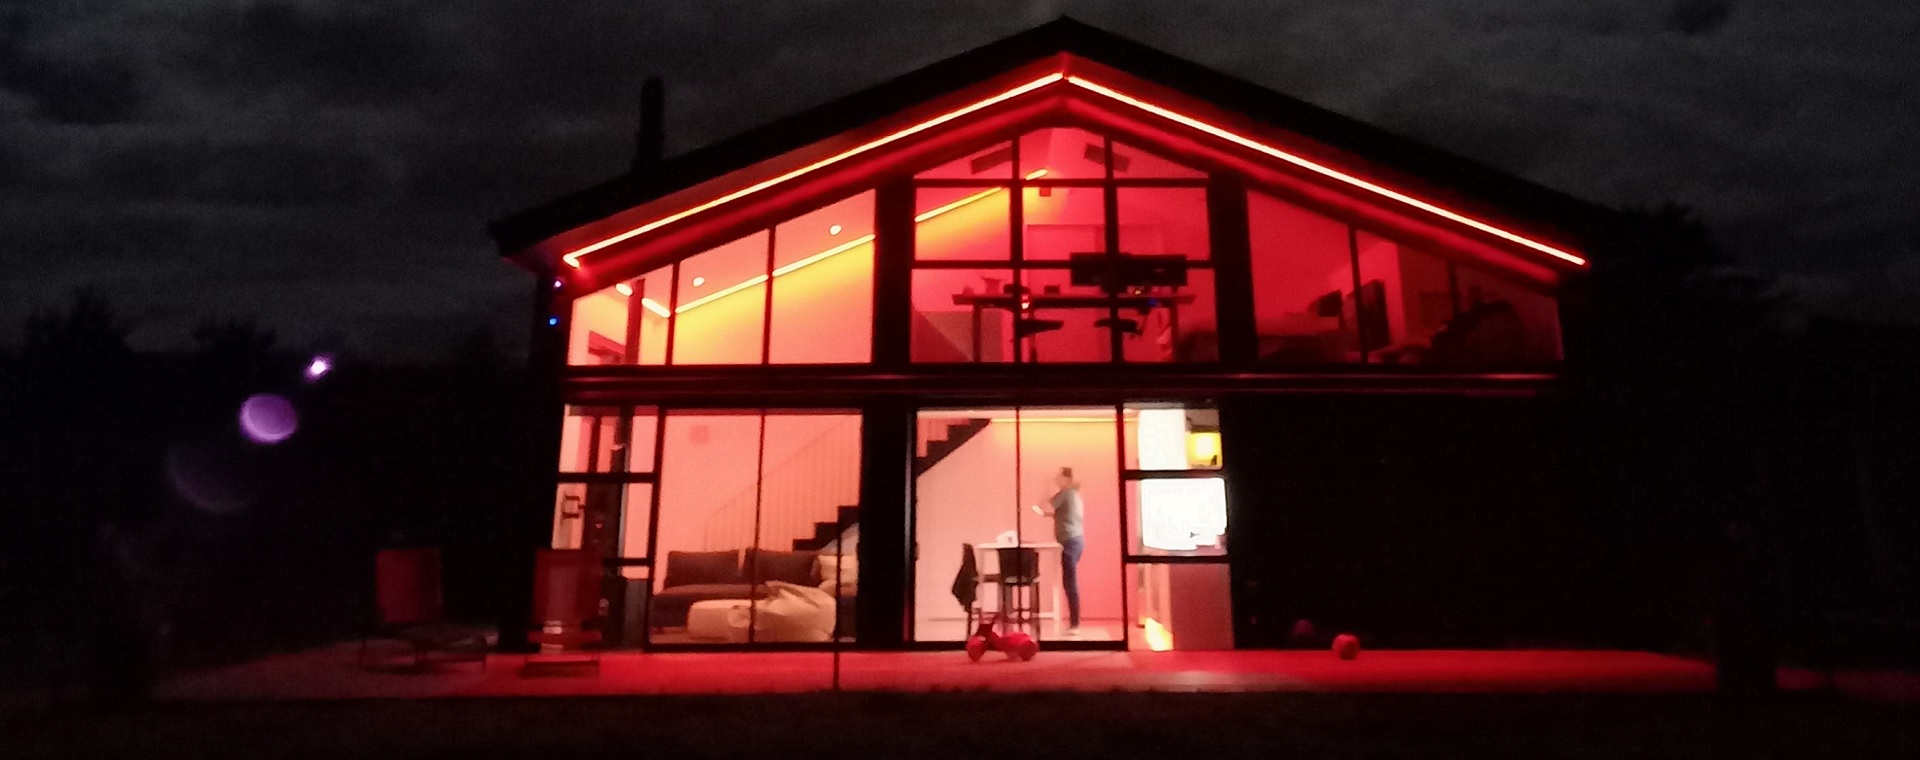 Off-grid home at night, with changeable colour LED light strips showing red lighting scene.